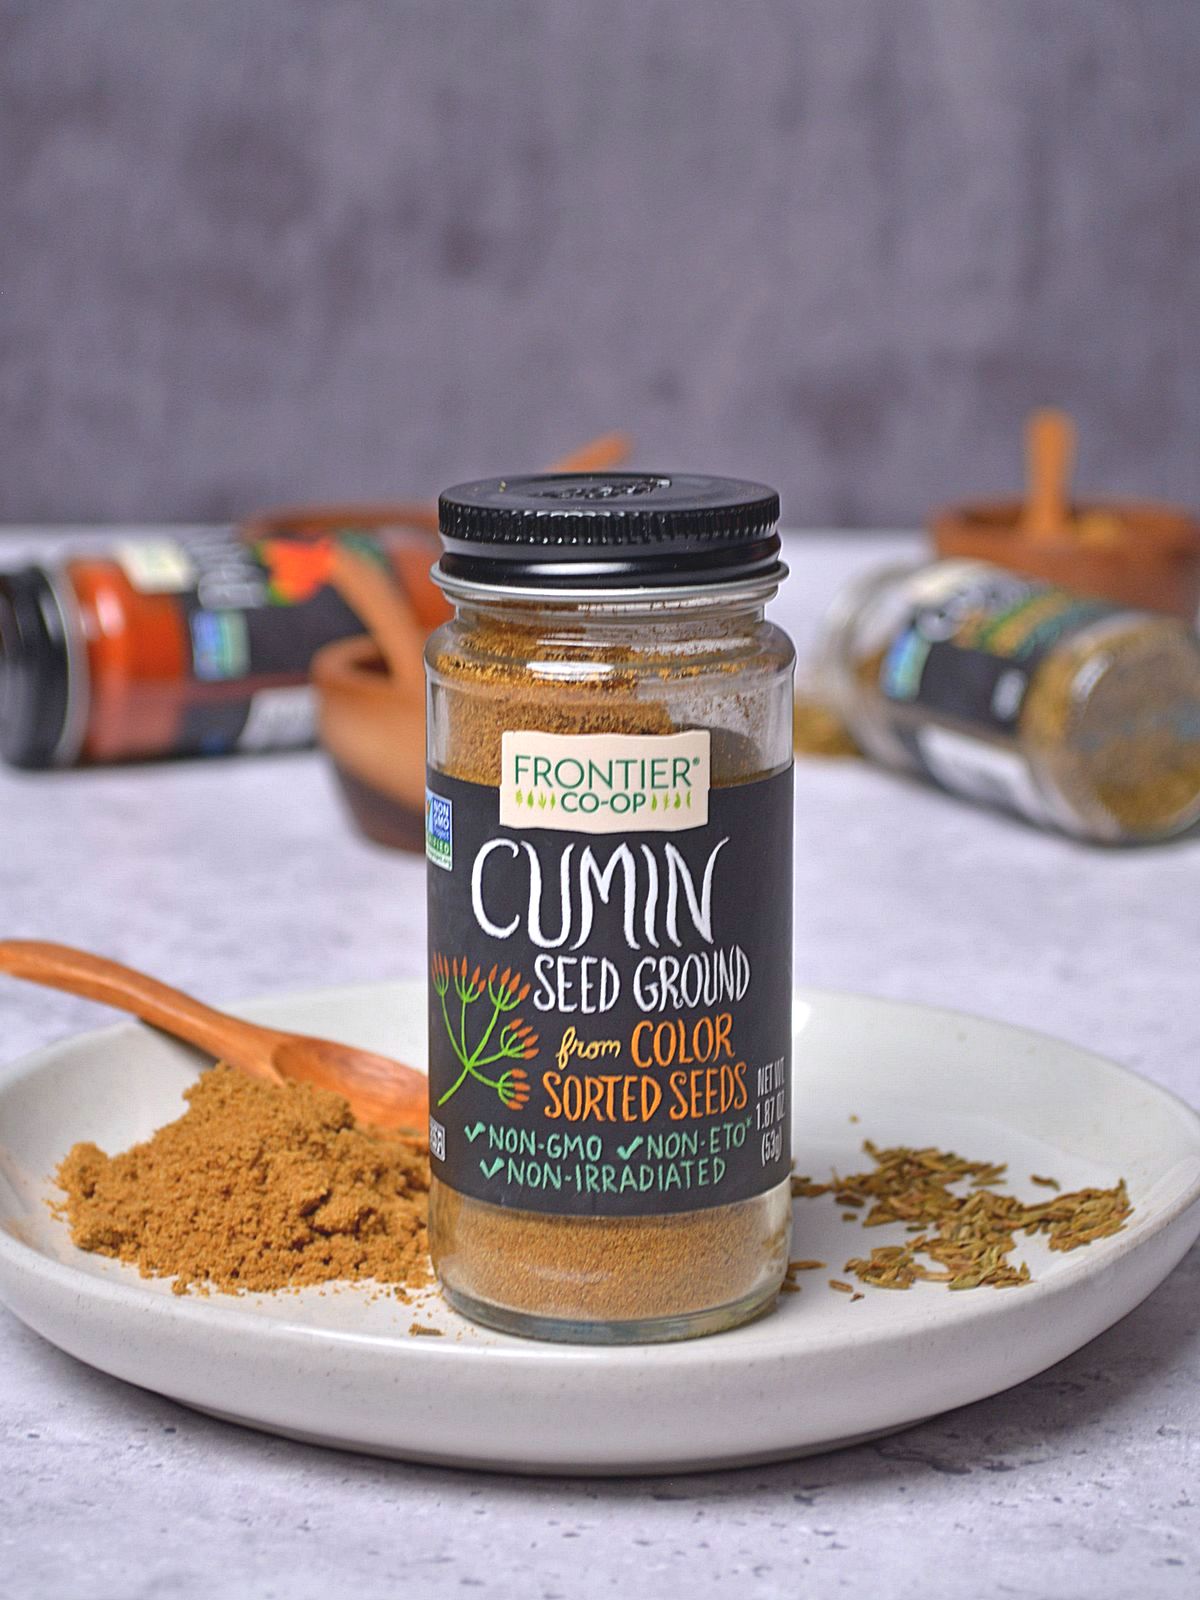 Cumin in a spice jar set on a white plate with ground cumin on the plate